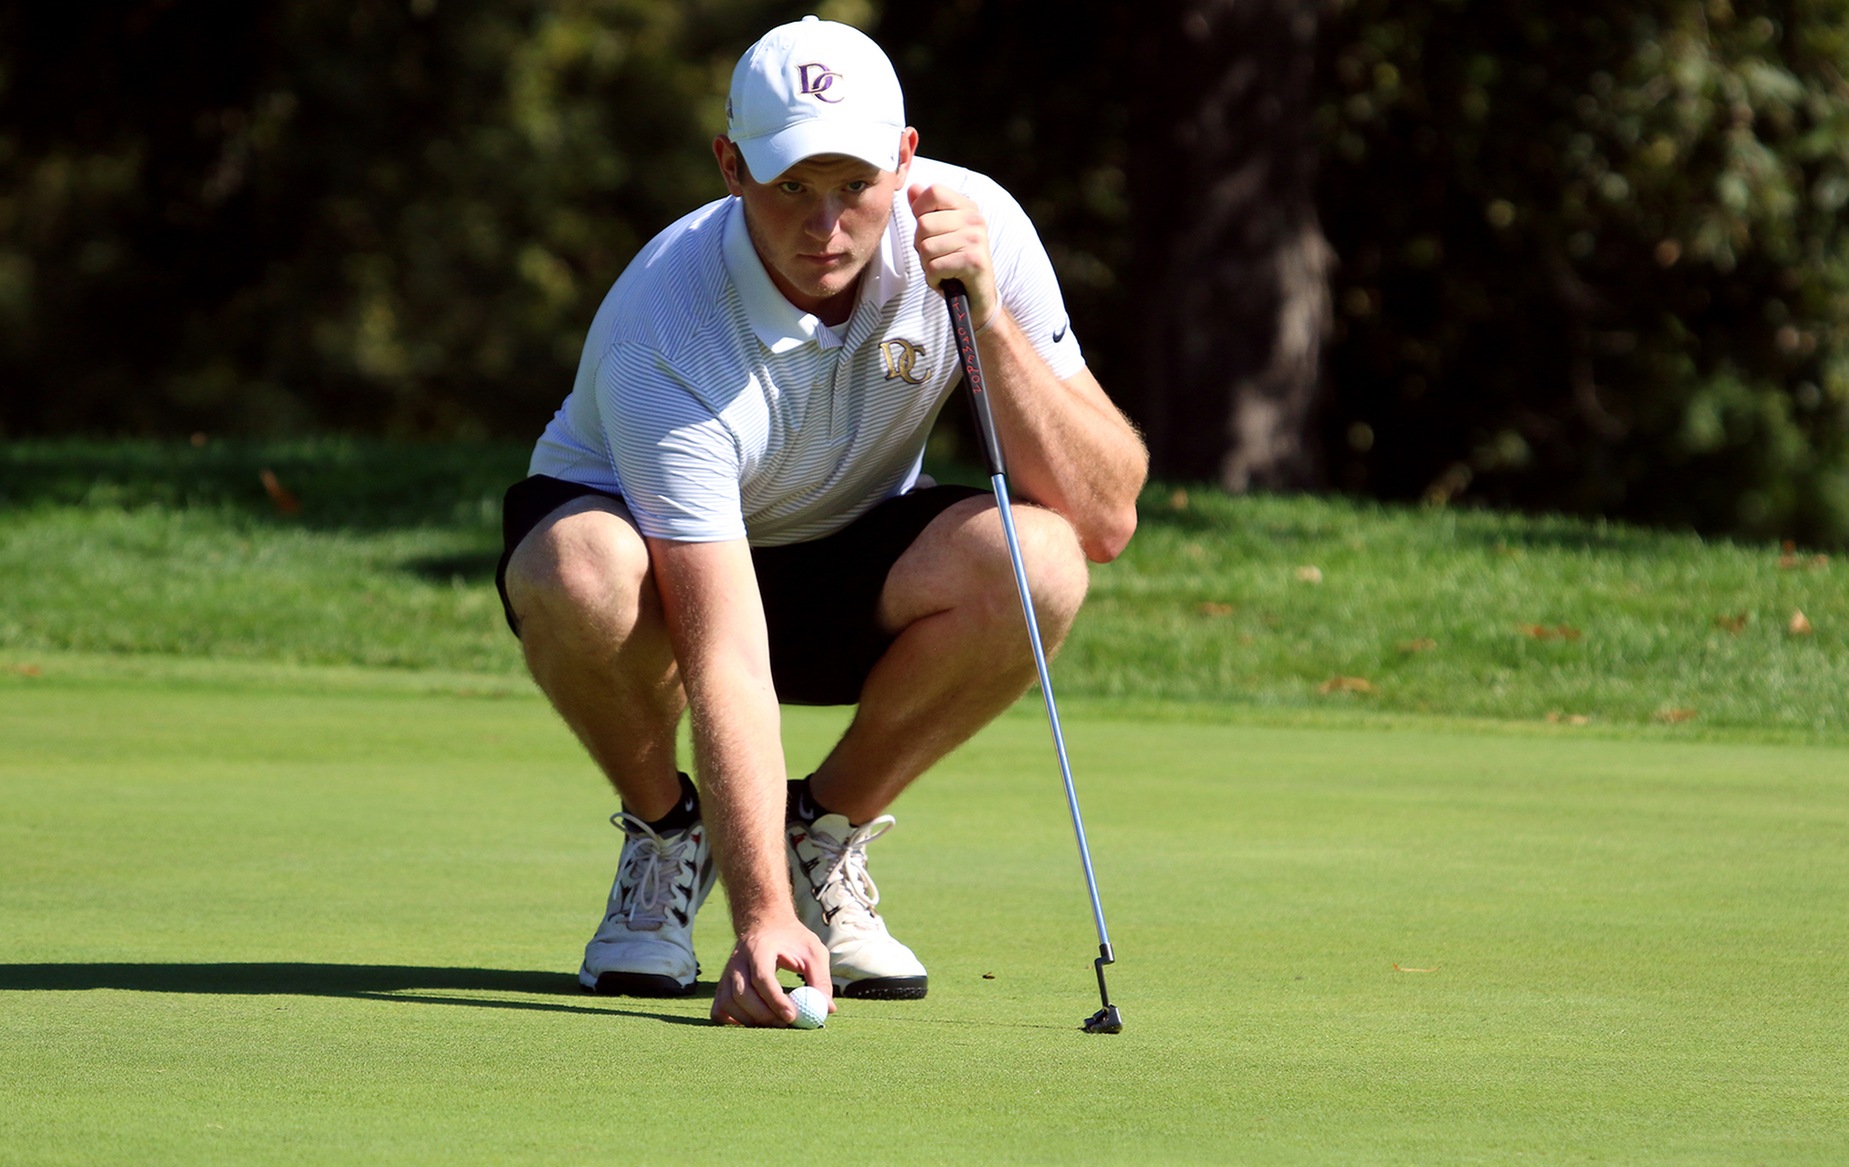 Miday Takes Medalist Honors at DC Spring Invite